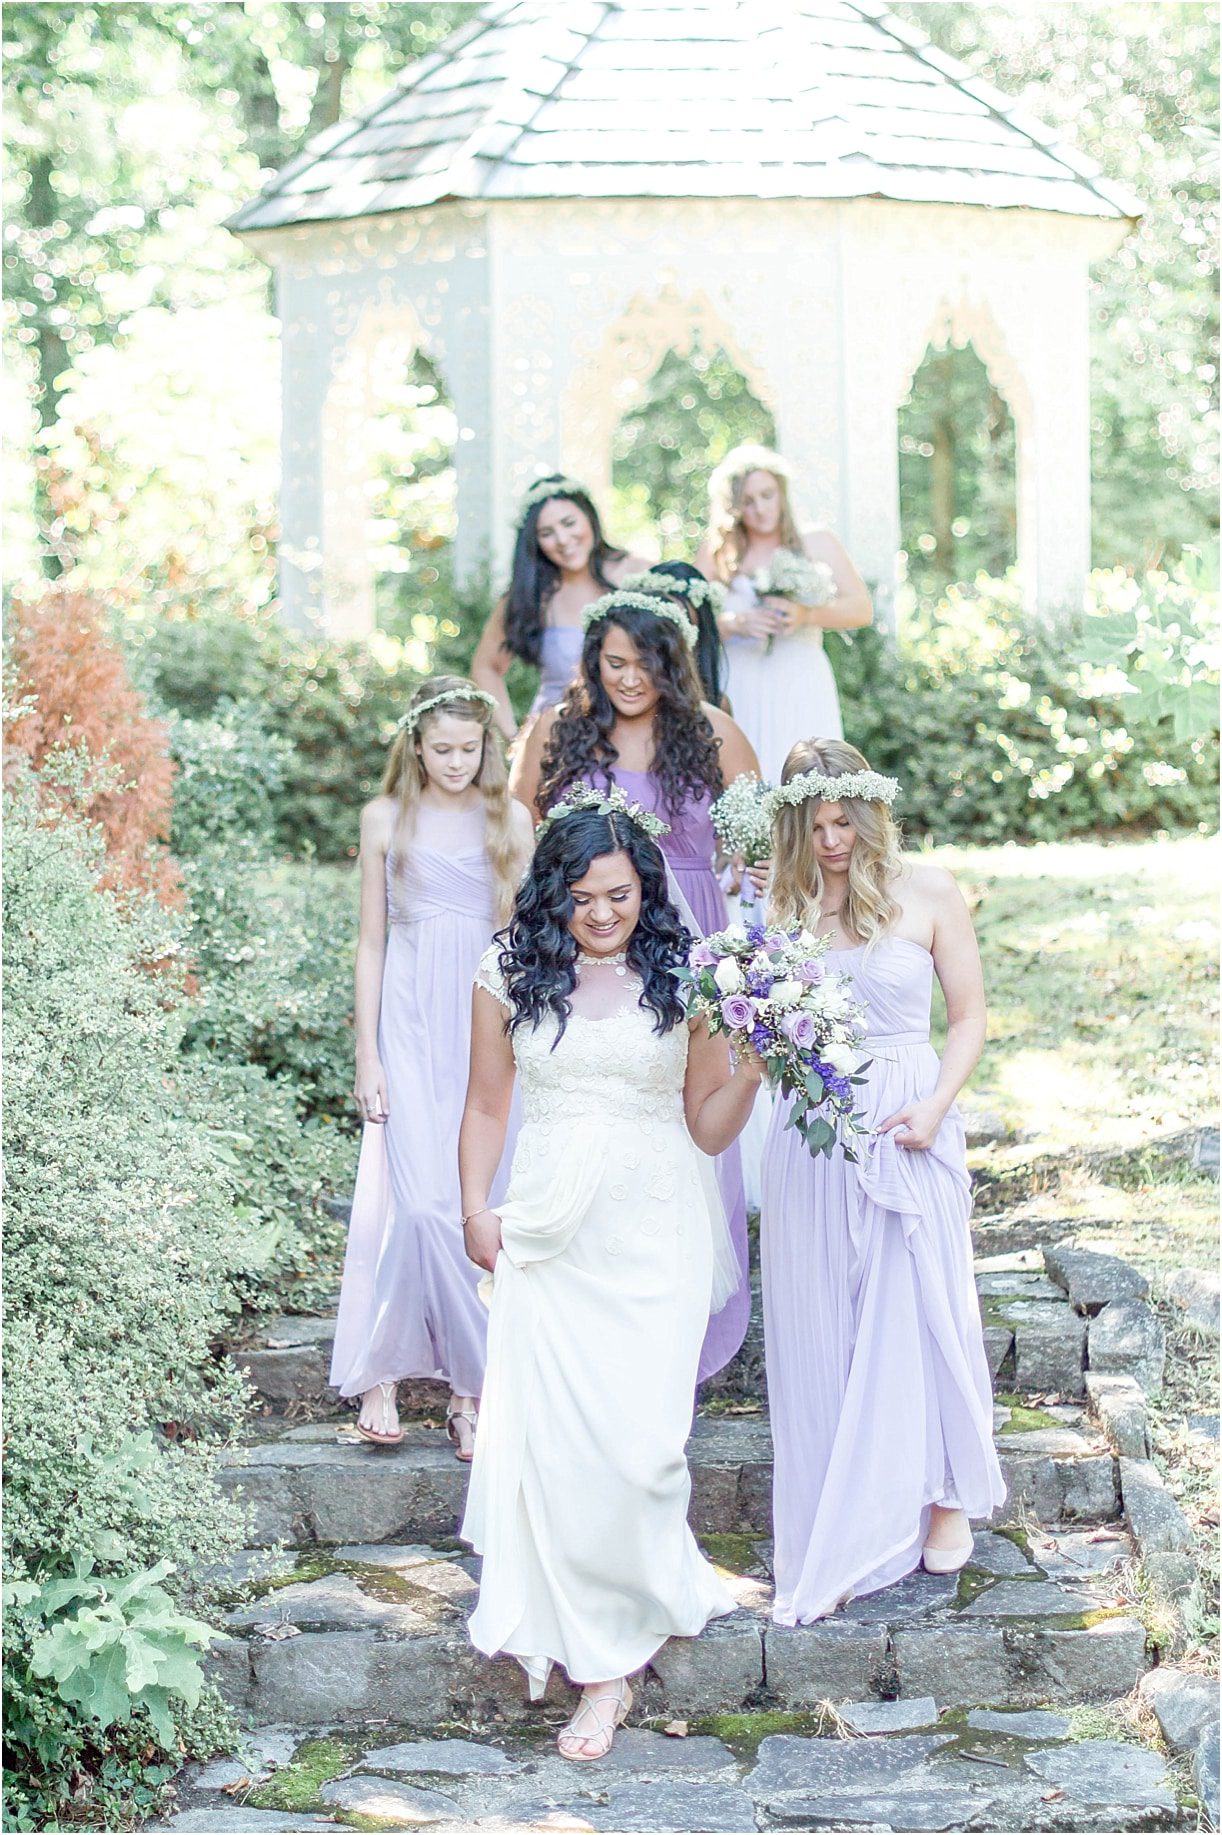 Interracial Lavender Richmond Virginia Wedding as seen on Hill City Bride Blog by Demi Mabry Photography mismatched bridesmaids attendants